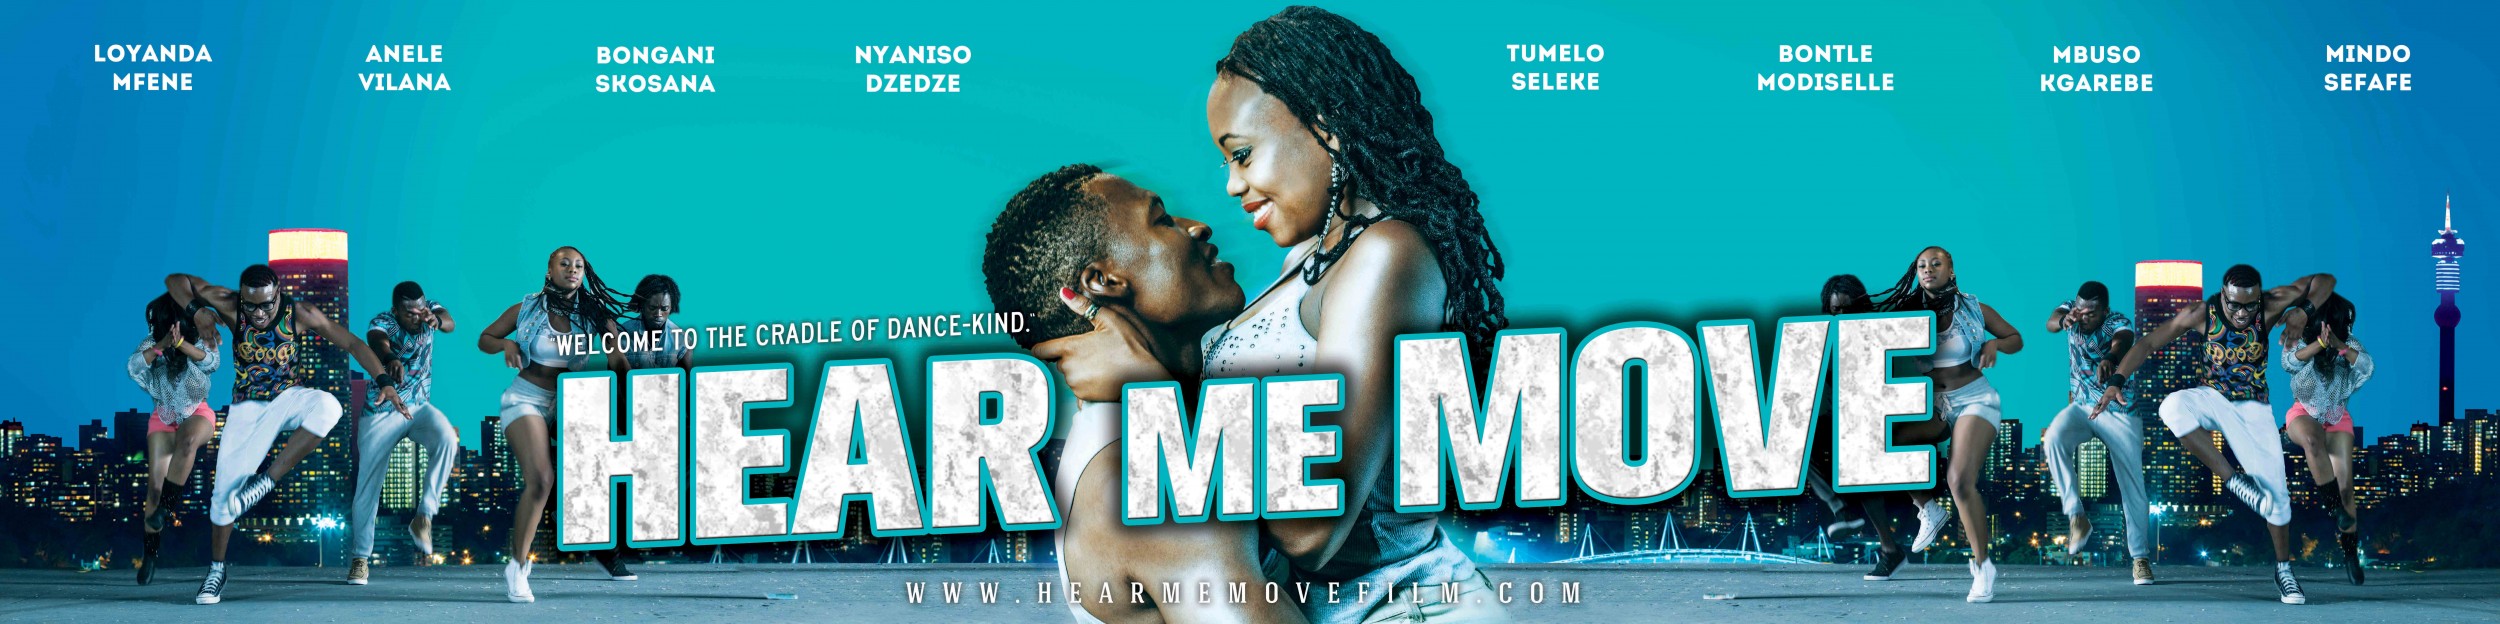 Mega Sized Movie Poster Image for Hear Me Move (#2 of 2)